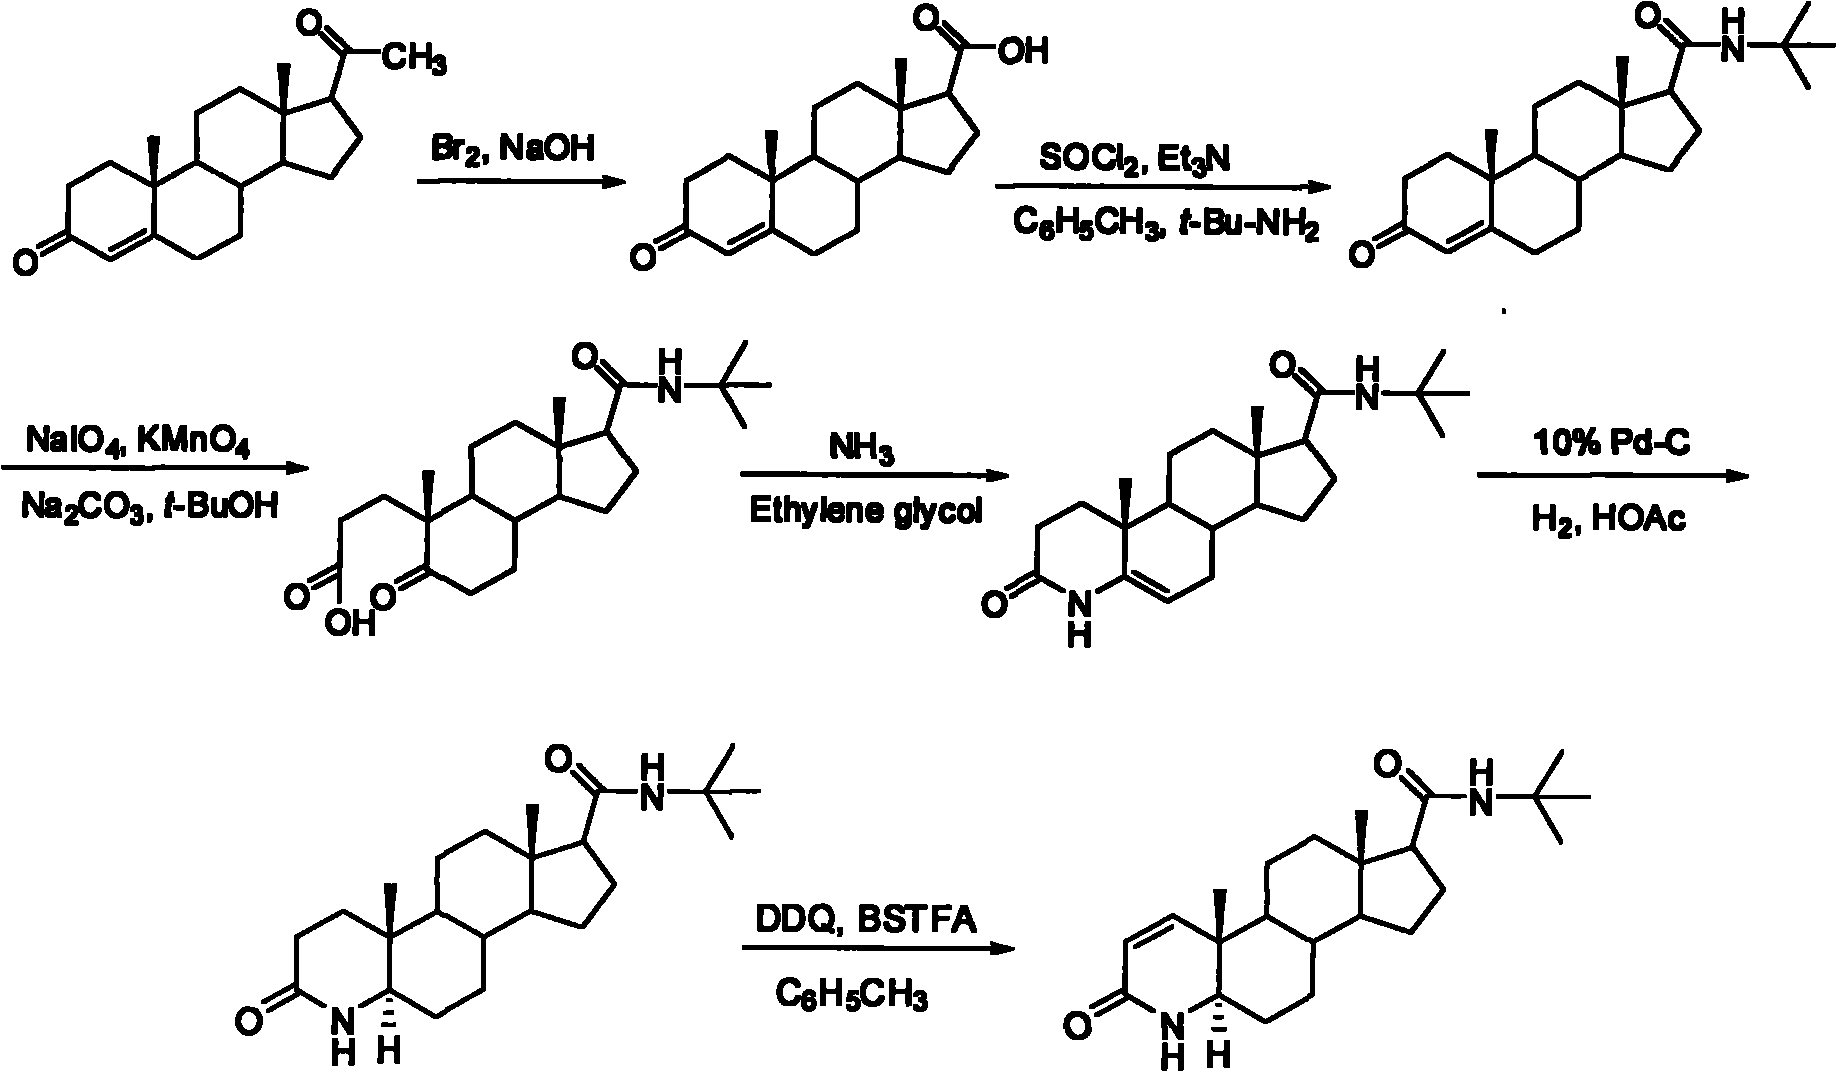 Method for synthesizing finasteride